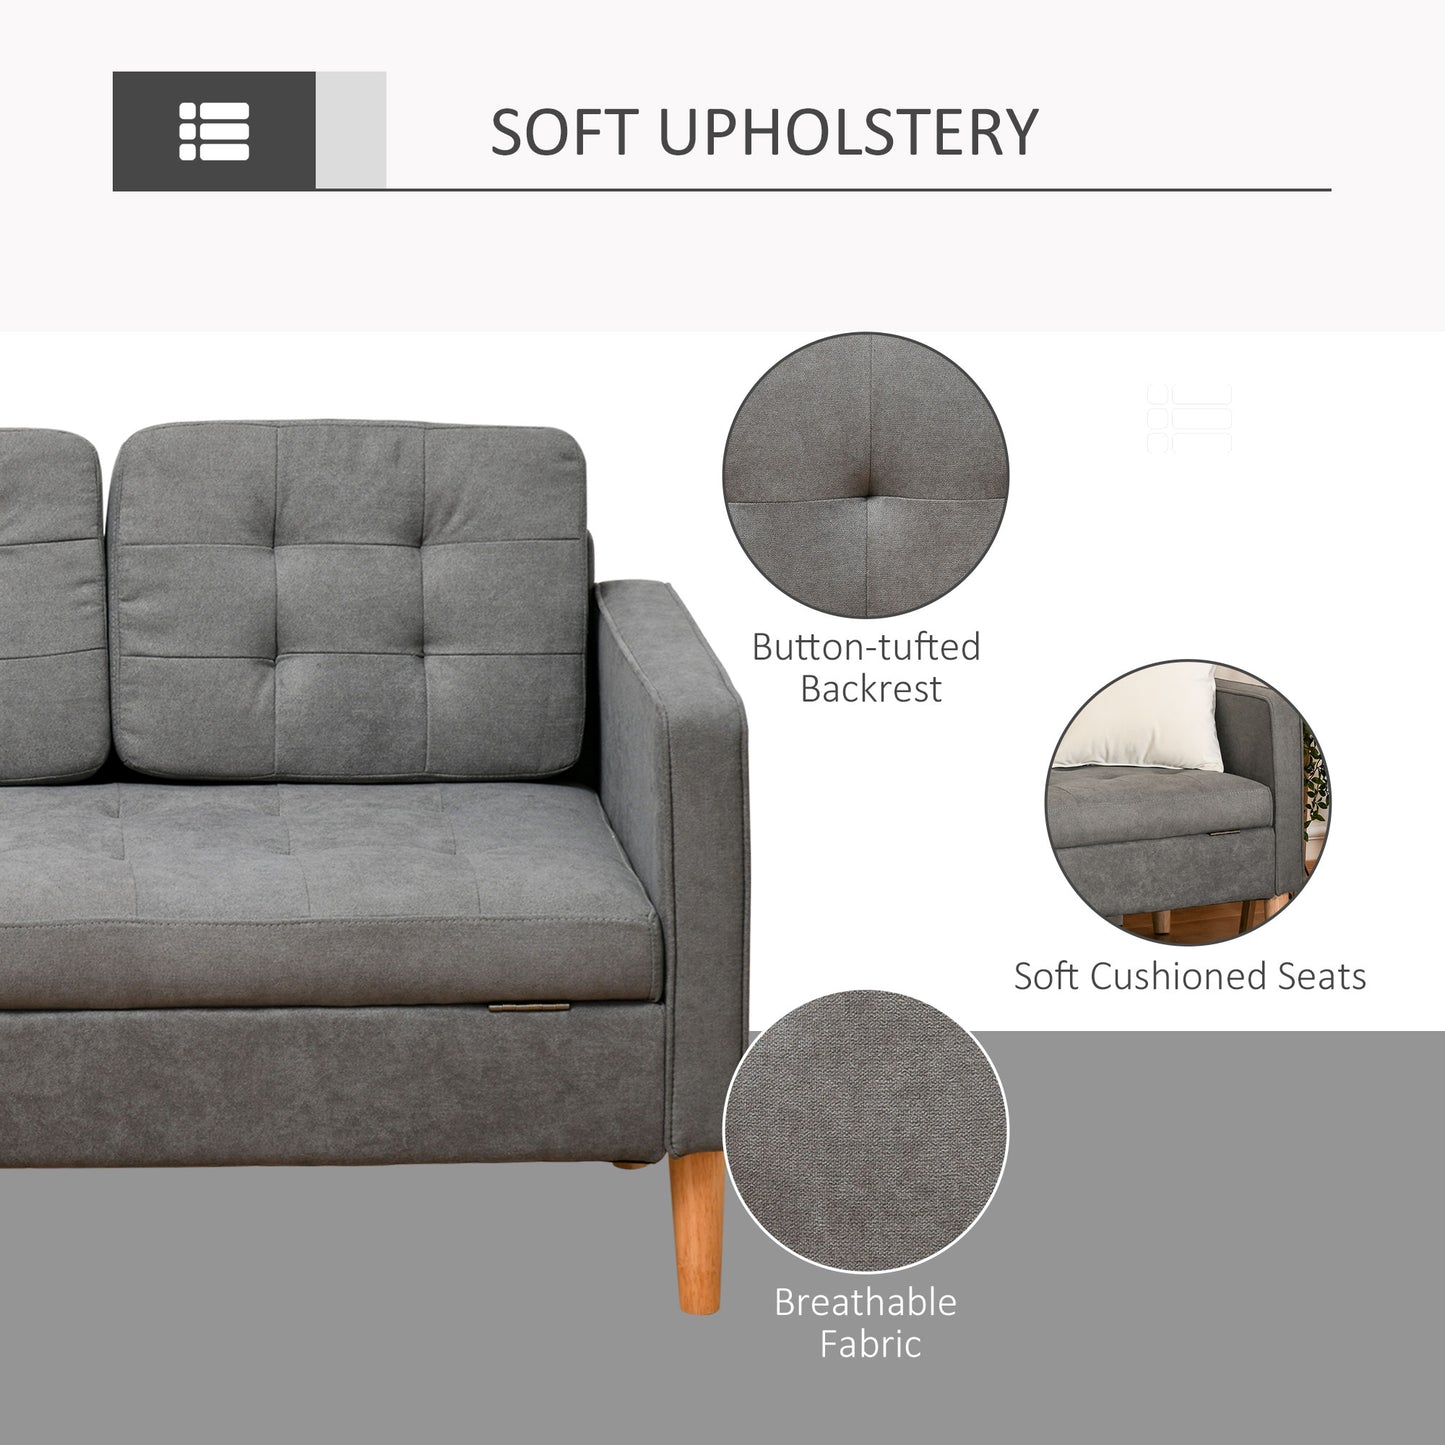 HOMCOM Modern 3-Seater Sofa Button-Tufted Fabric Couch with Storage Chest Rubberwood Legs for Living Room, Grey Chest,